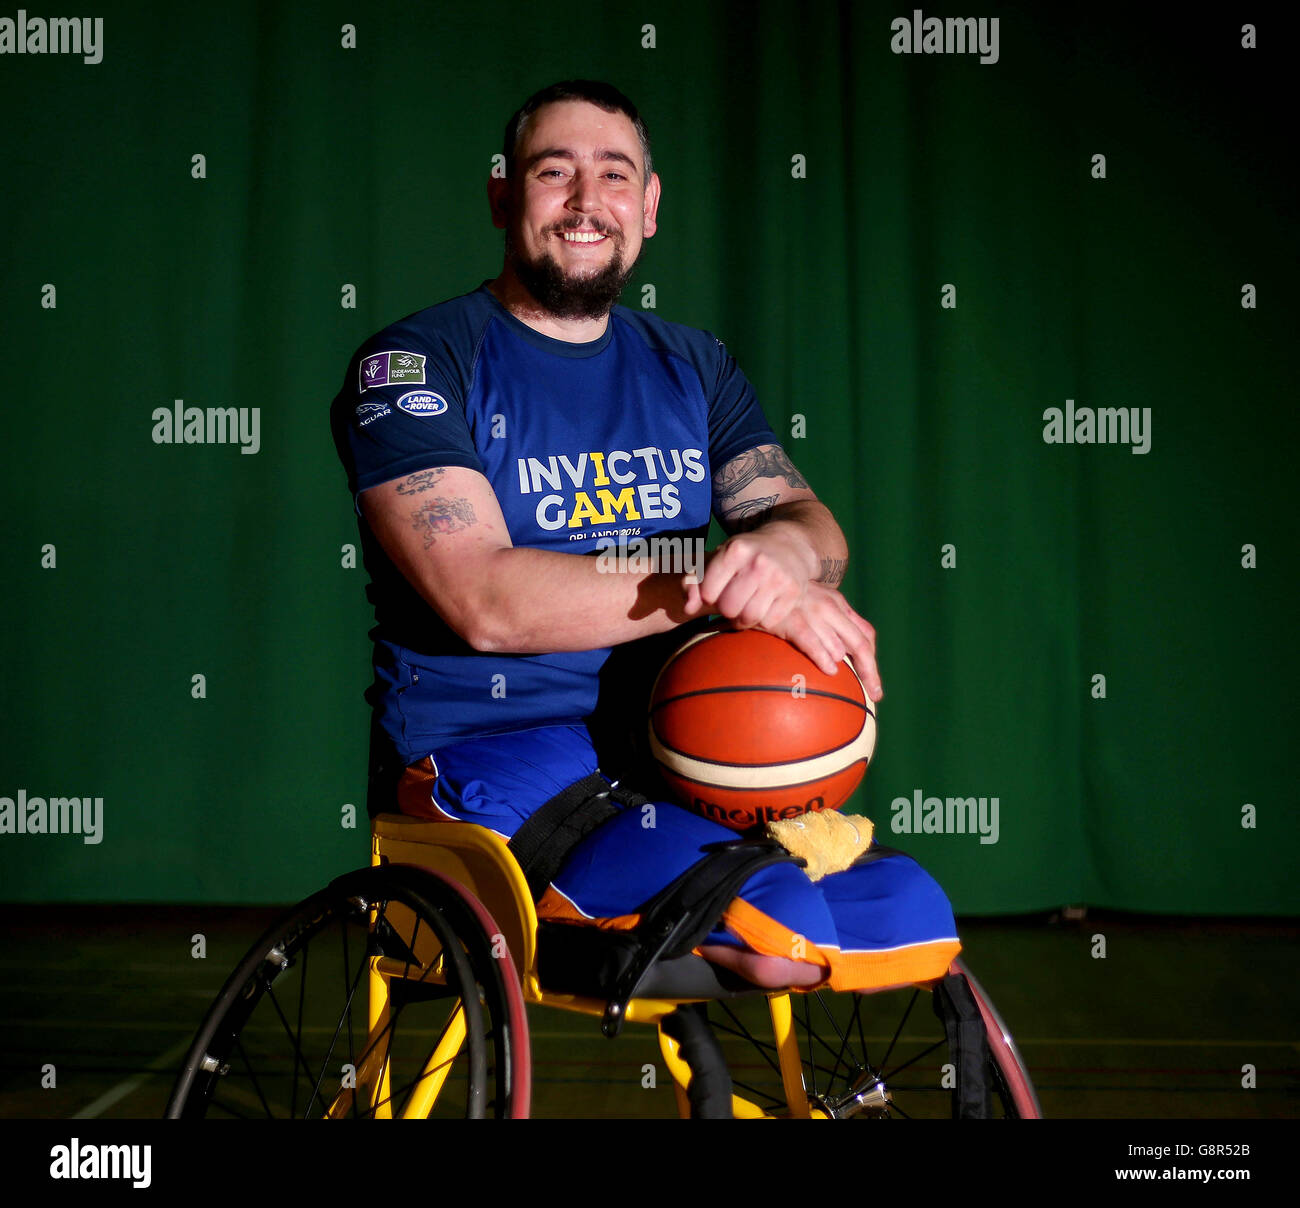 UK wheelchair basketball team training session. Craig Winspear from Hartlepool during a training session for the wheelchair basketball team ahead of the Invictus Games in Orlando Stock Photo